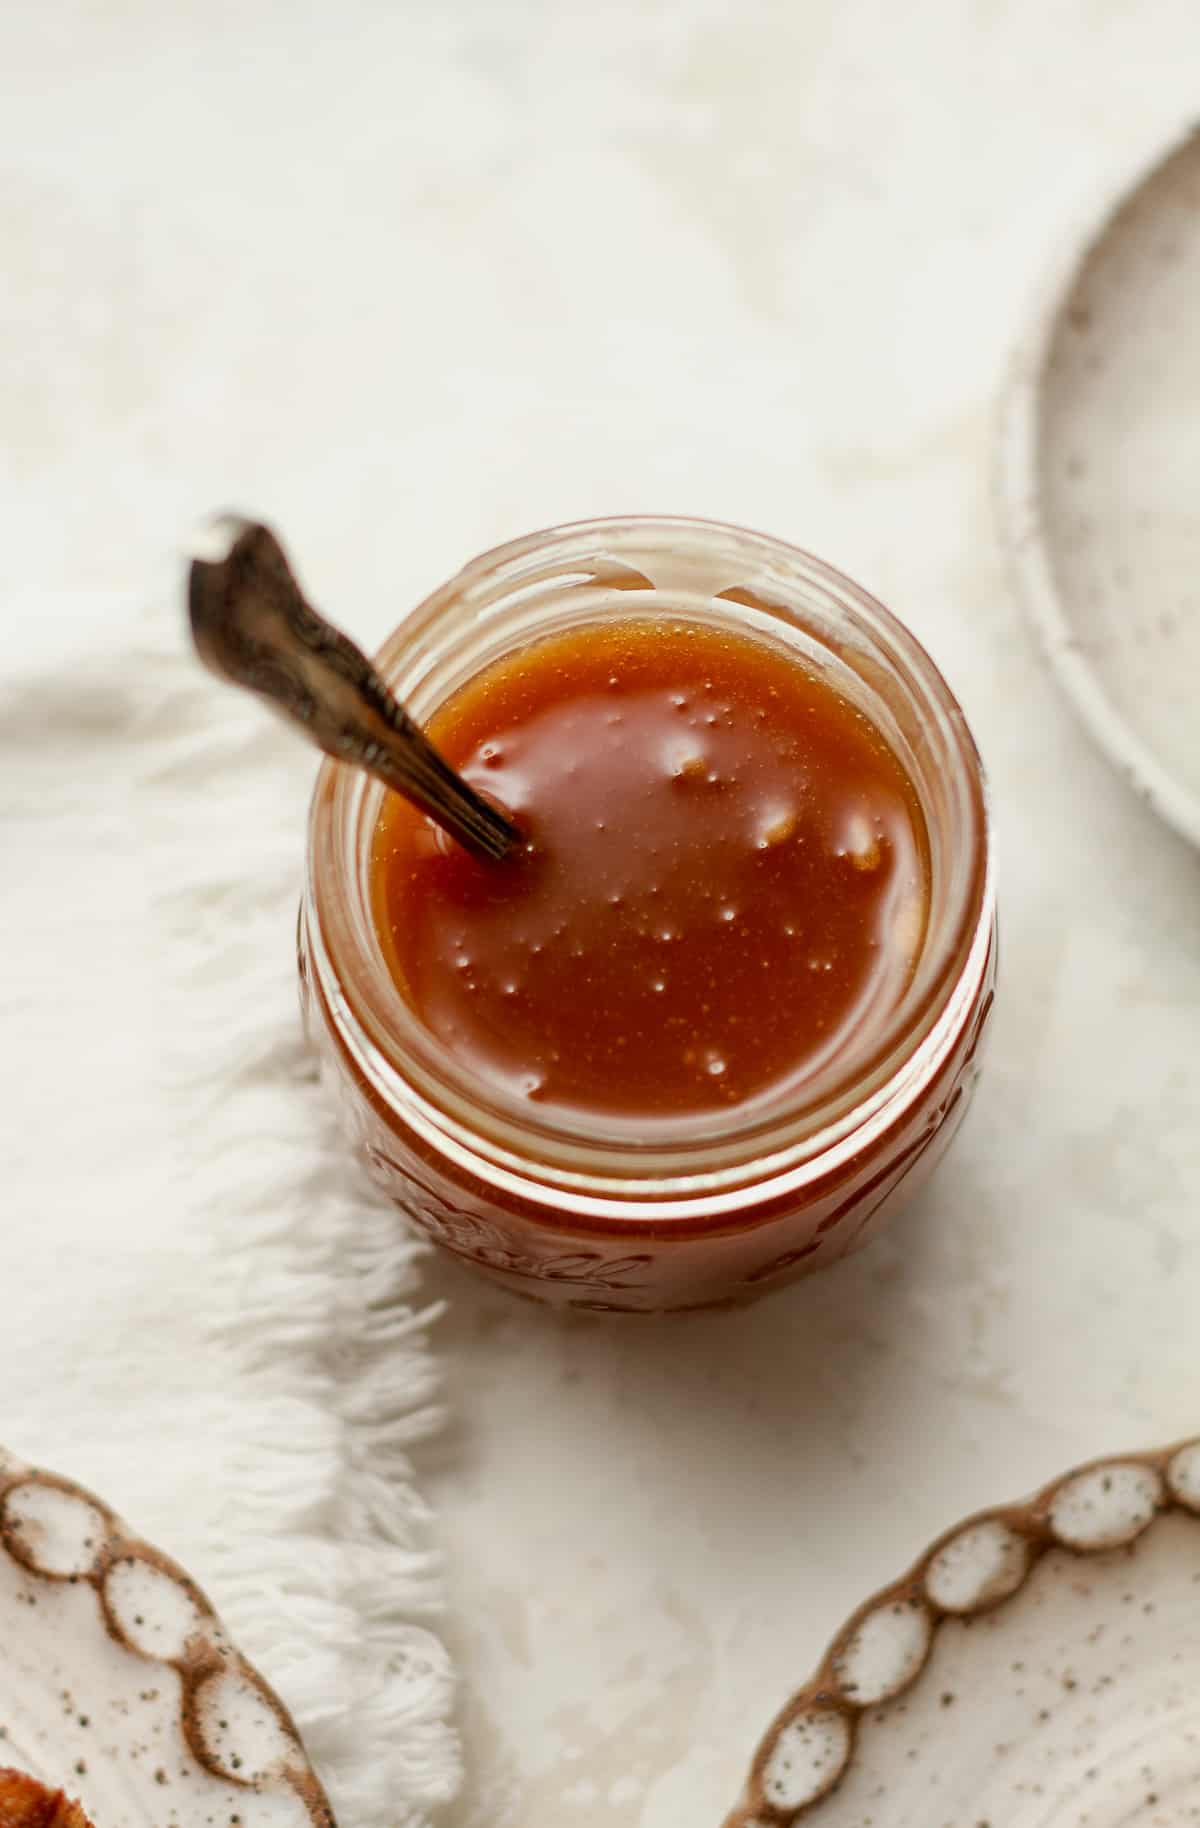 Overhead view of a small jar of caramel sauce with a spoon.